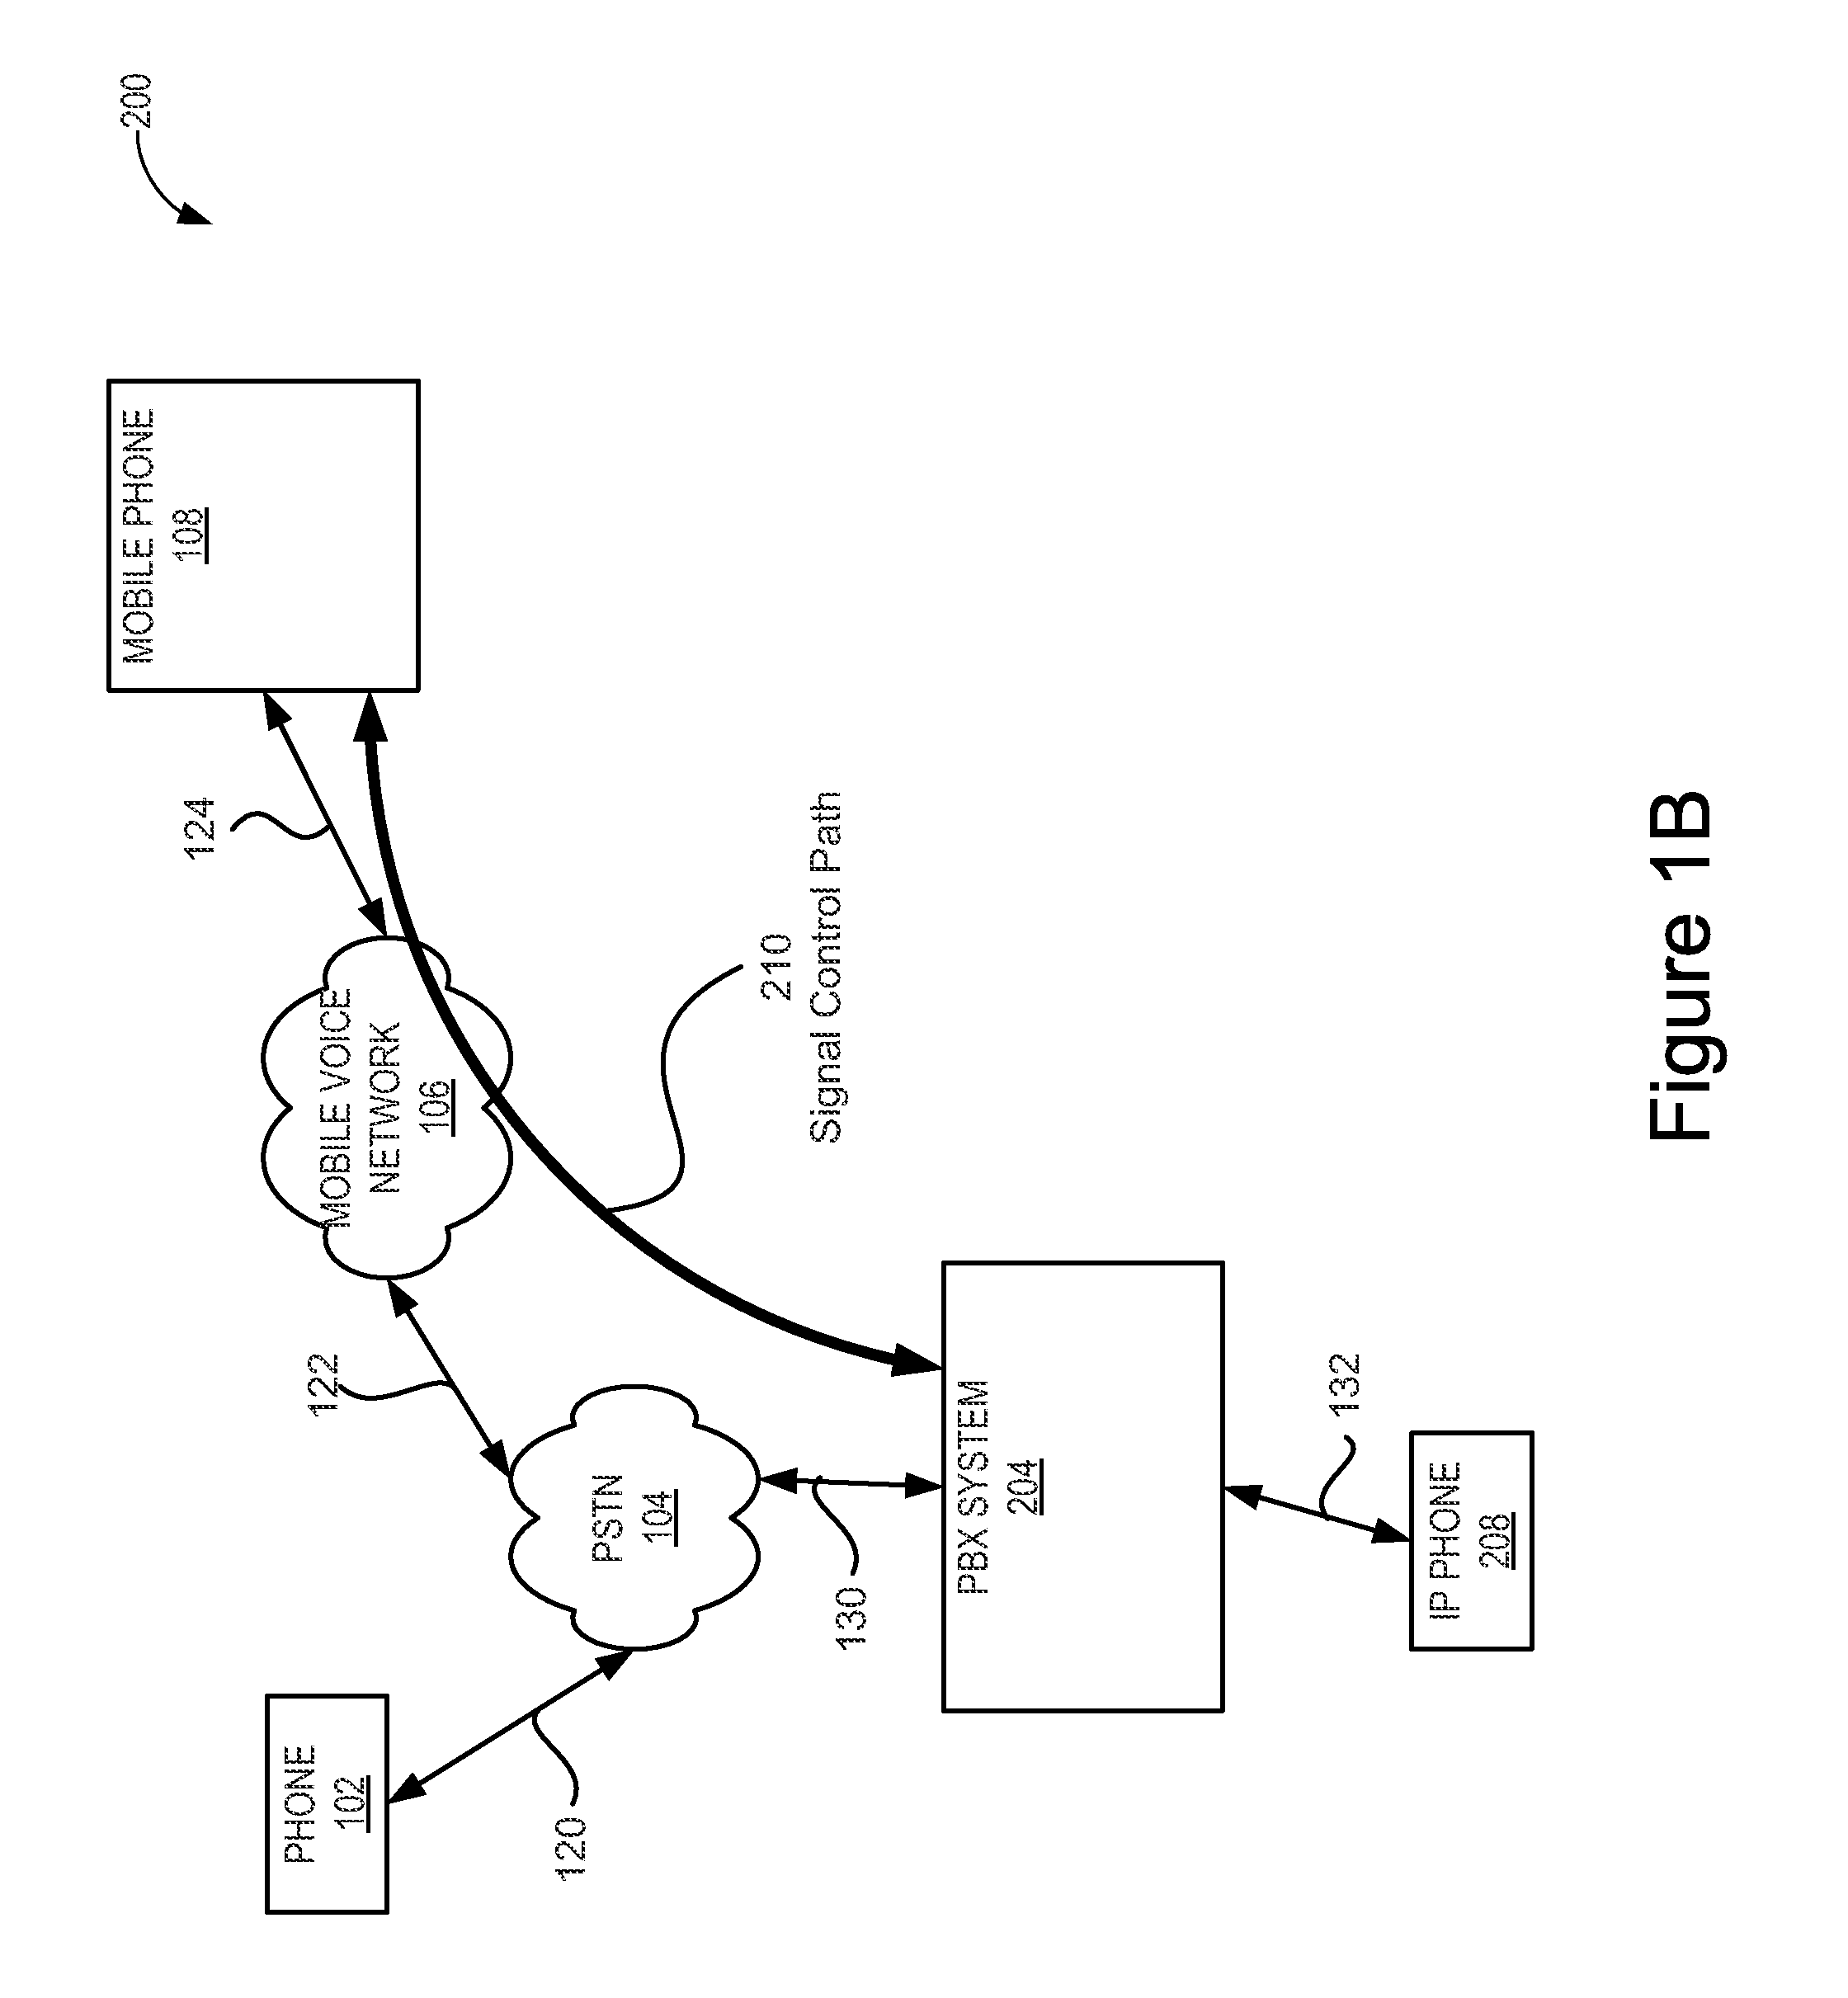 Mobile phone integration with a private branch exchange in a distributed telephony system